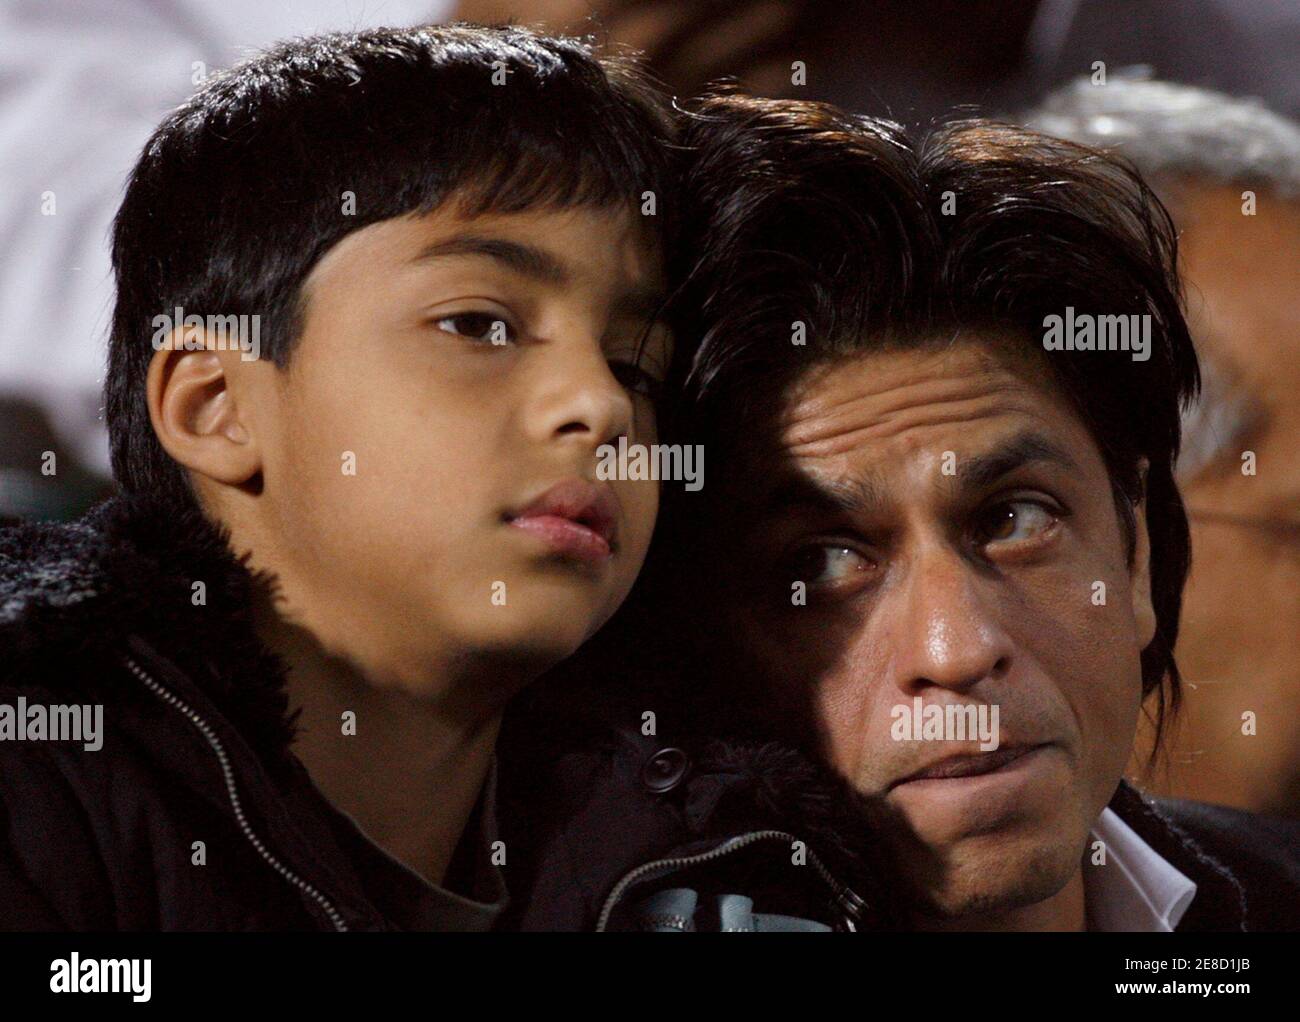 Bollywood star Shahrukh Khan and son Aryan Khan (L) watch the fifth and final one-day international cricket match between India and Pakistan in Jaipur November 18, 2007. REUTERS/Adnan Abidi (INDIA) Stock Photo